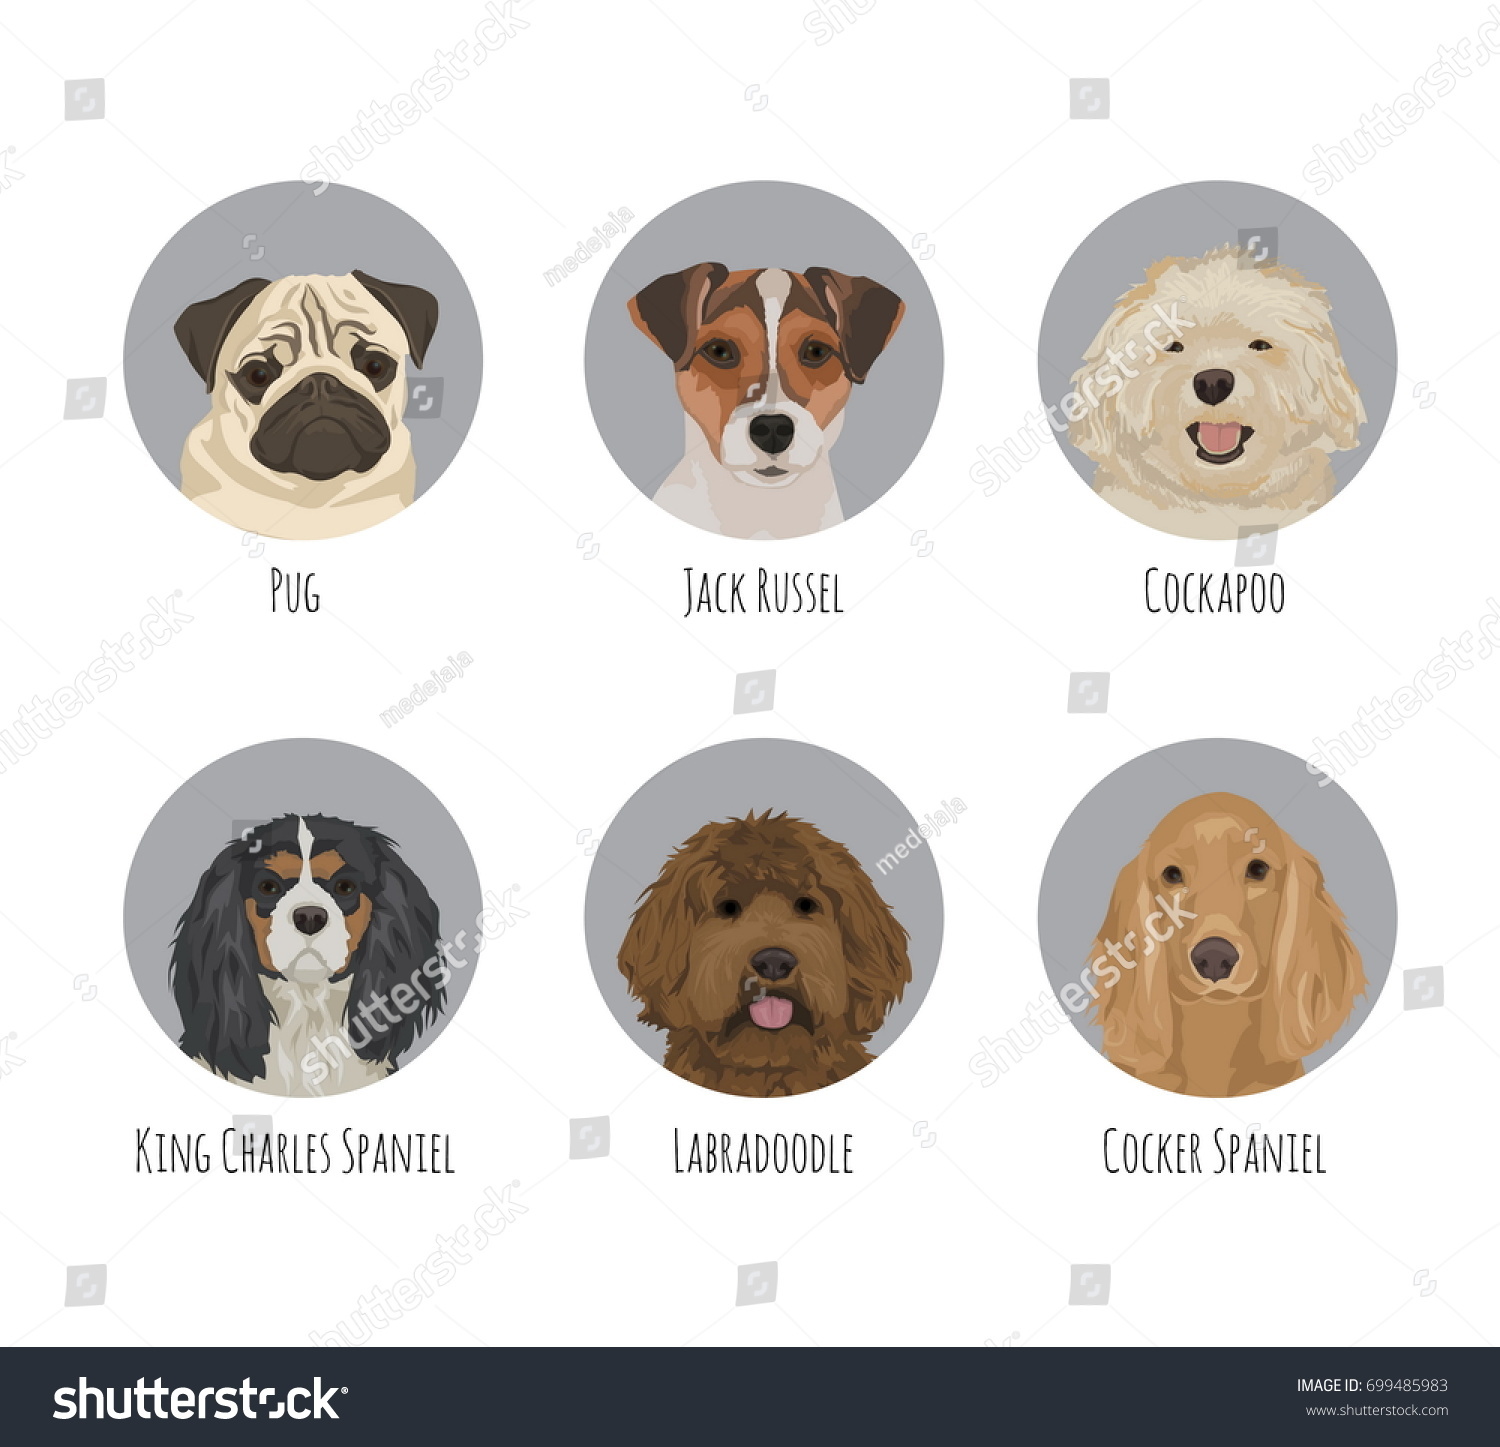 SVG of Dog animal pet round circle portrait badge stickers. Various dog breeds and kind, friendly cute jack russel terrier, pug, spaniel, labradoodle, cockapoo svg